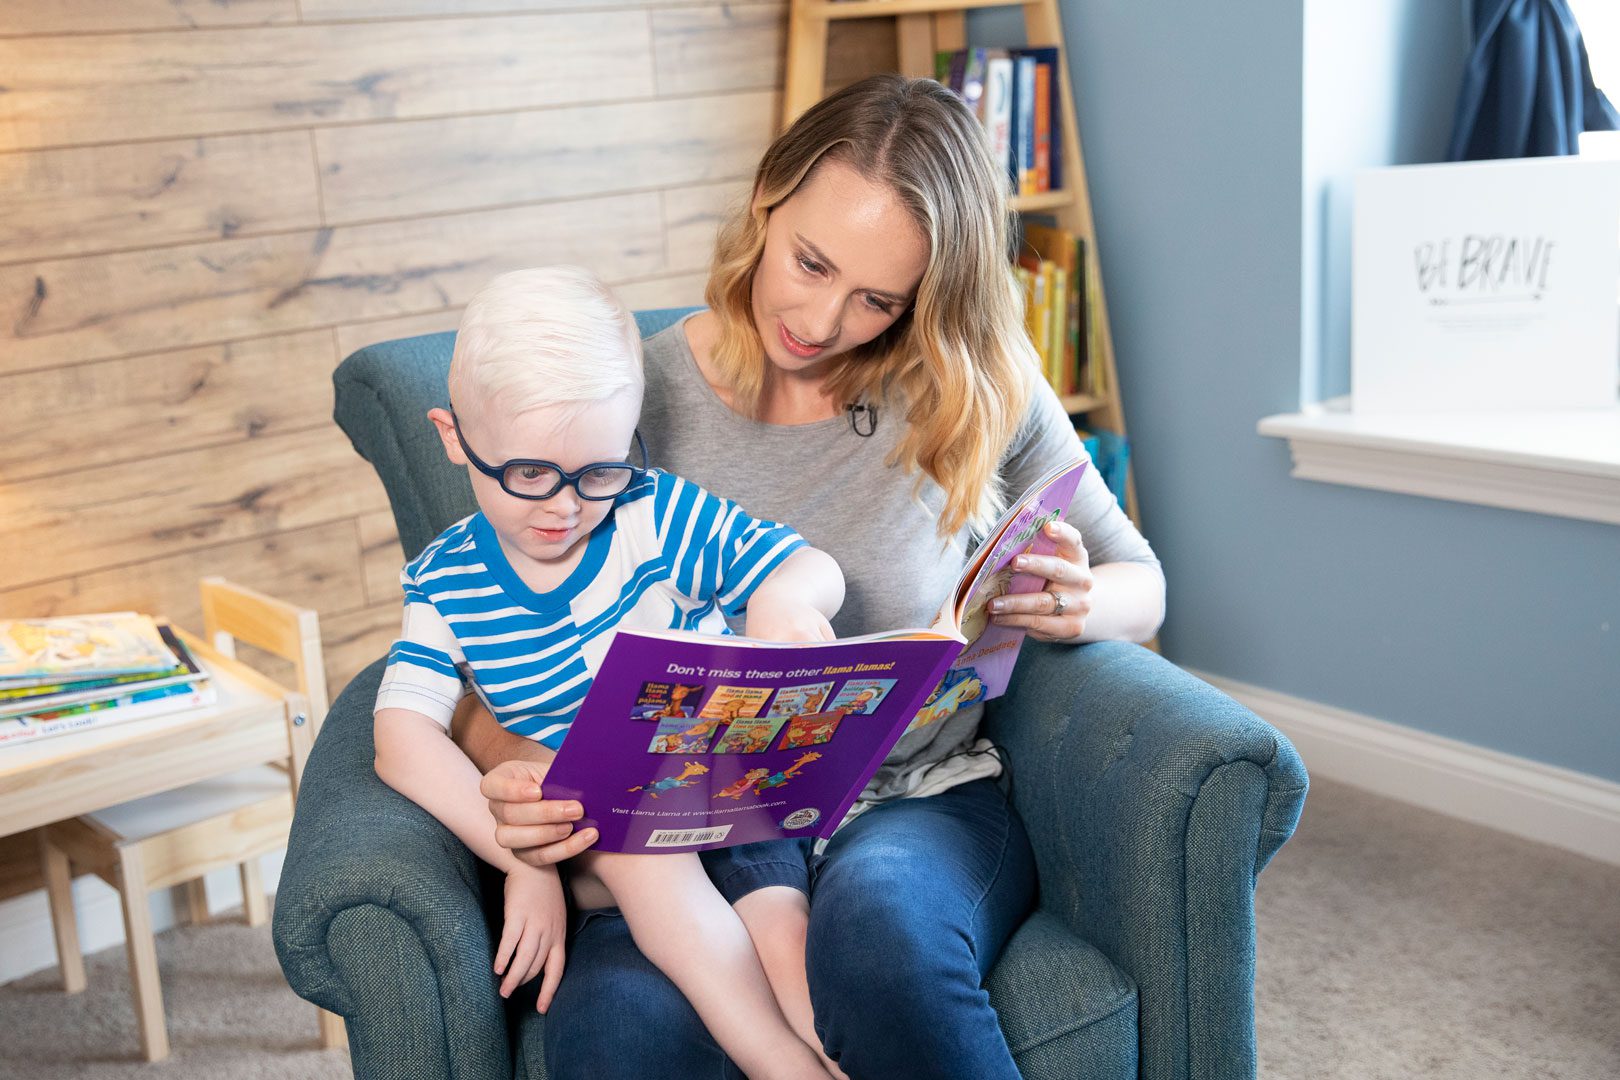 A mother and child sitting in an armchair together wile reading a print/braille book. The child is wearing glasses.